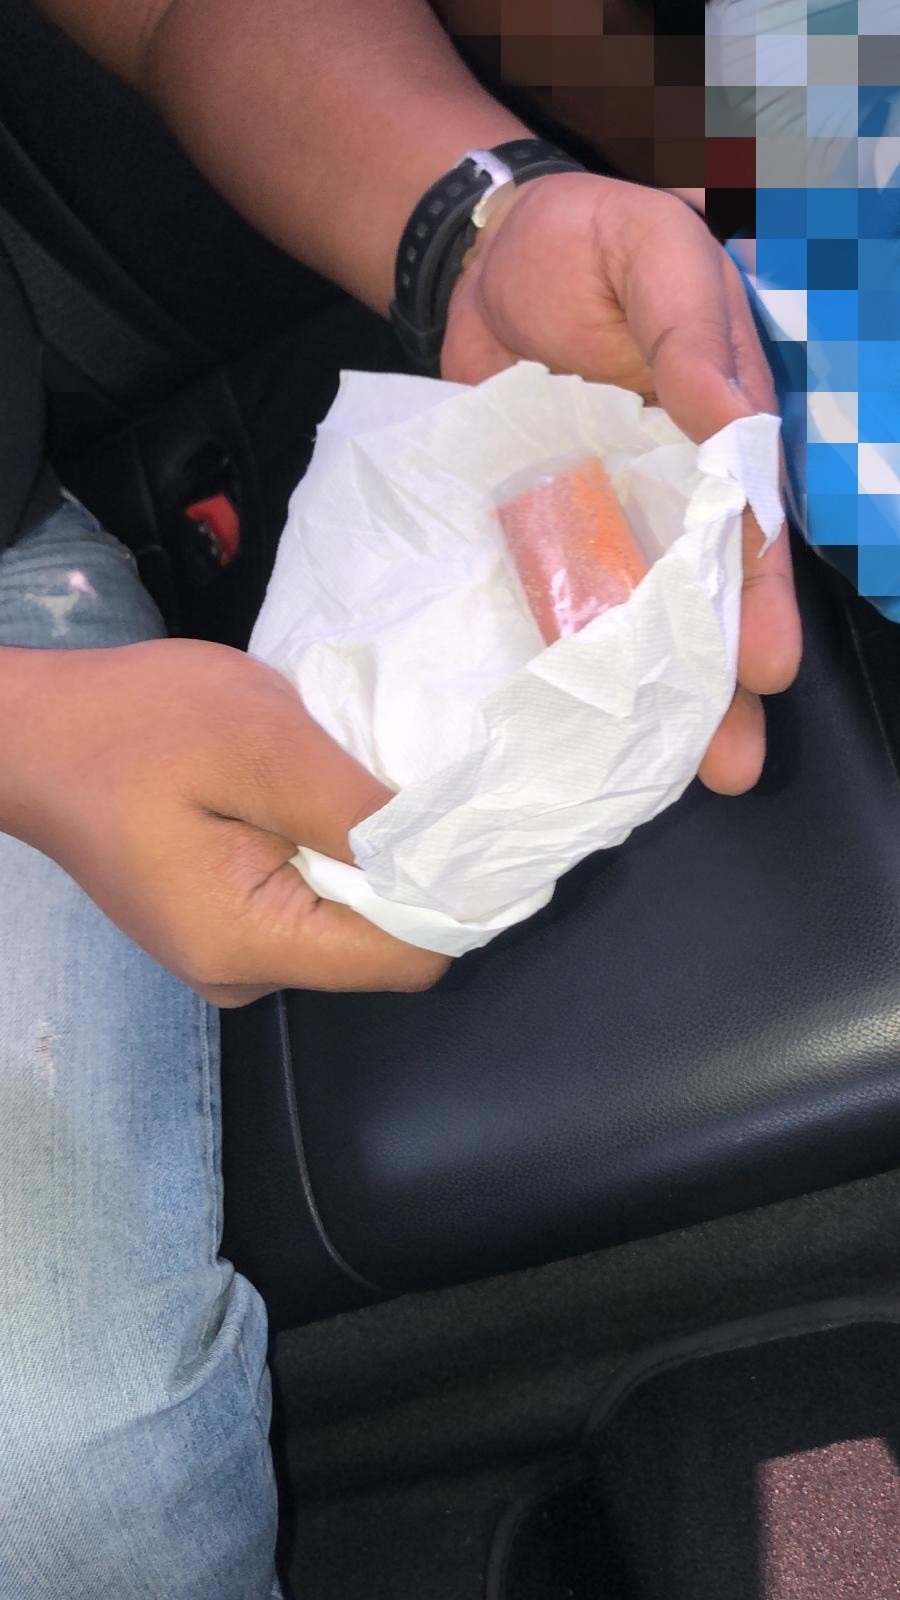 Photos- 1 and 2 (CNB): Brownish powdery substance recovered from CNB’s operation at Ang Mo Kio Ave 3 on 16 September 2019.